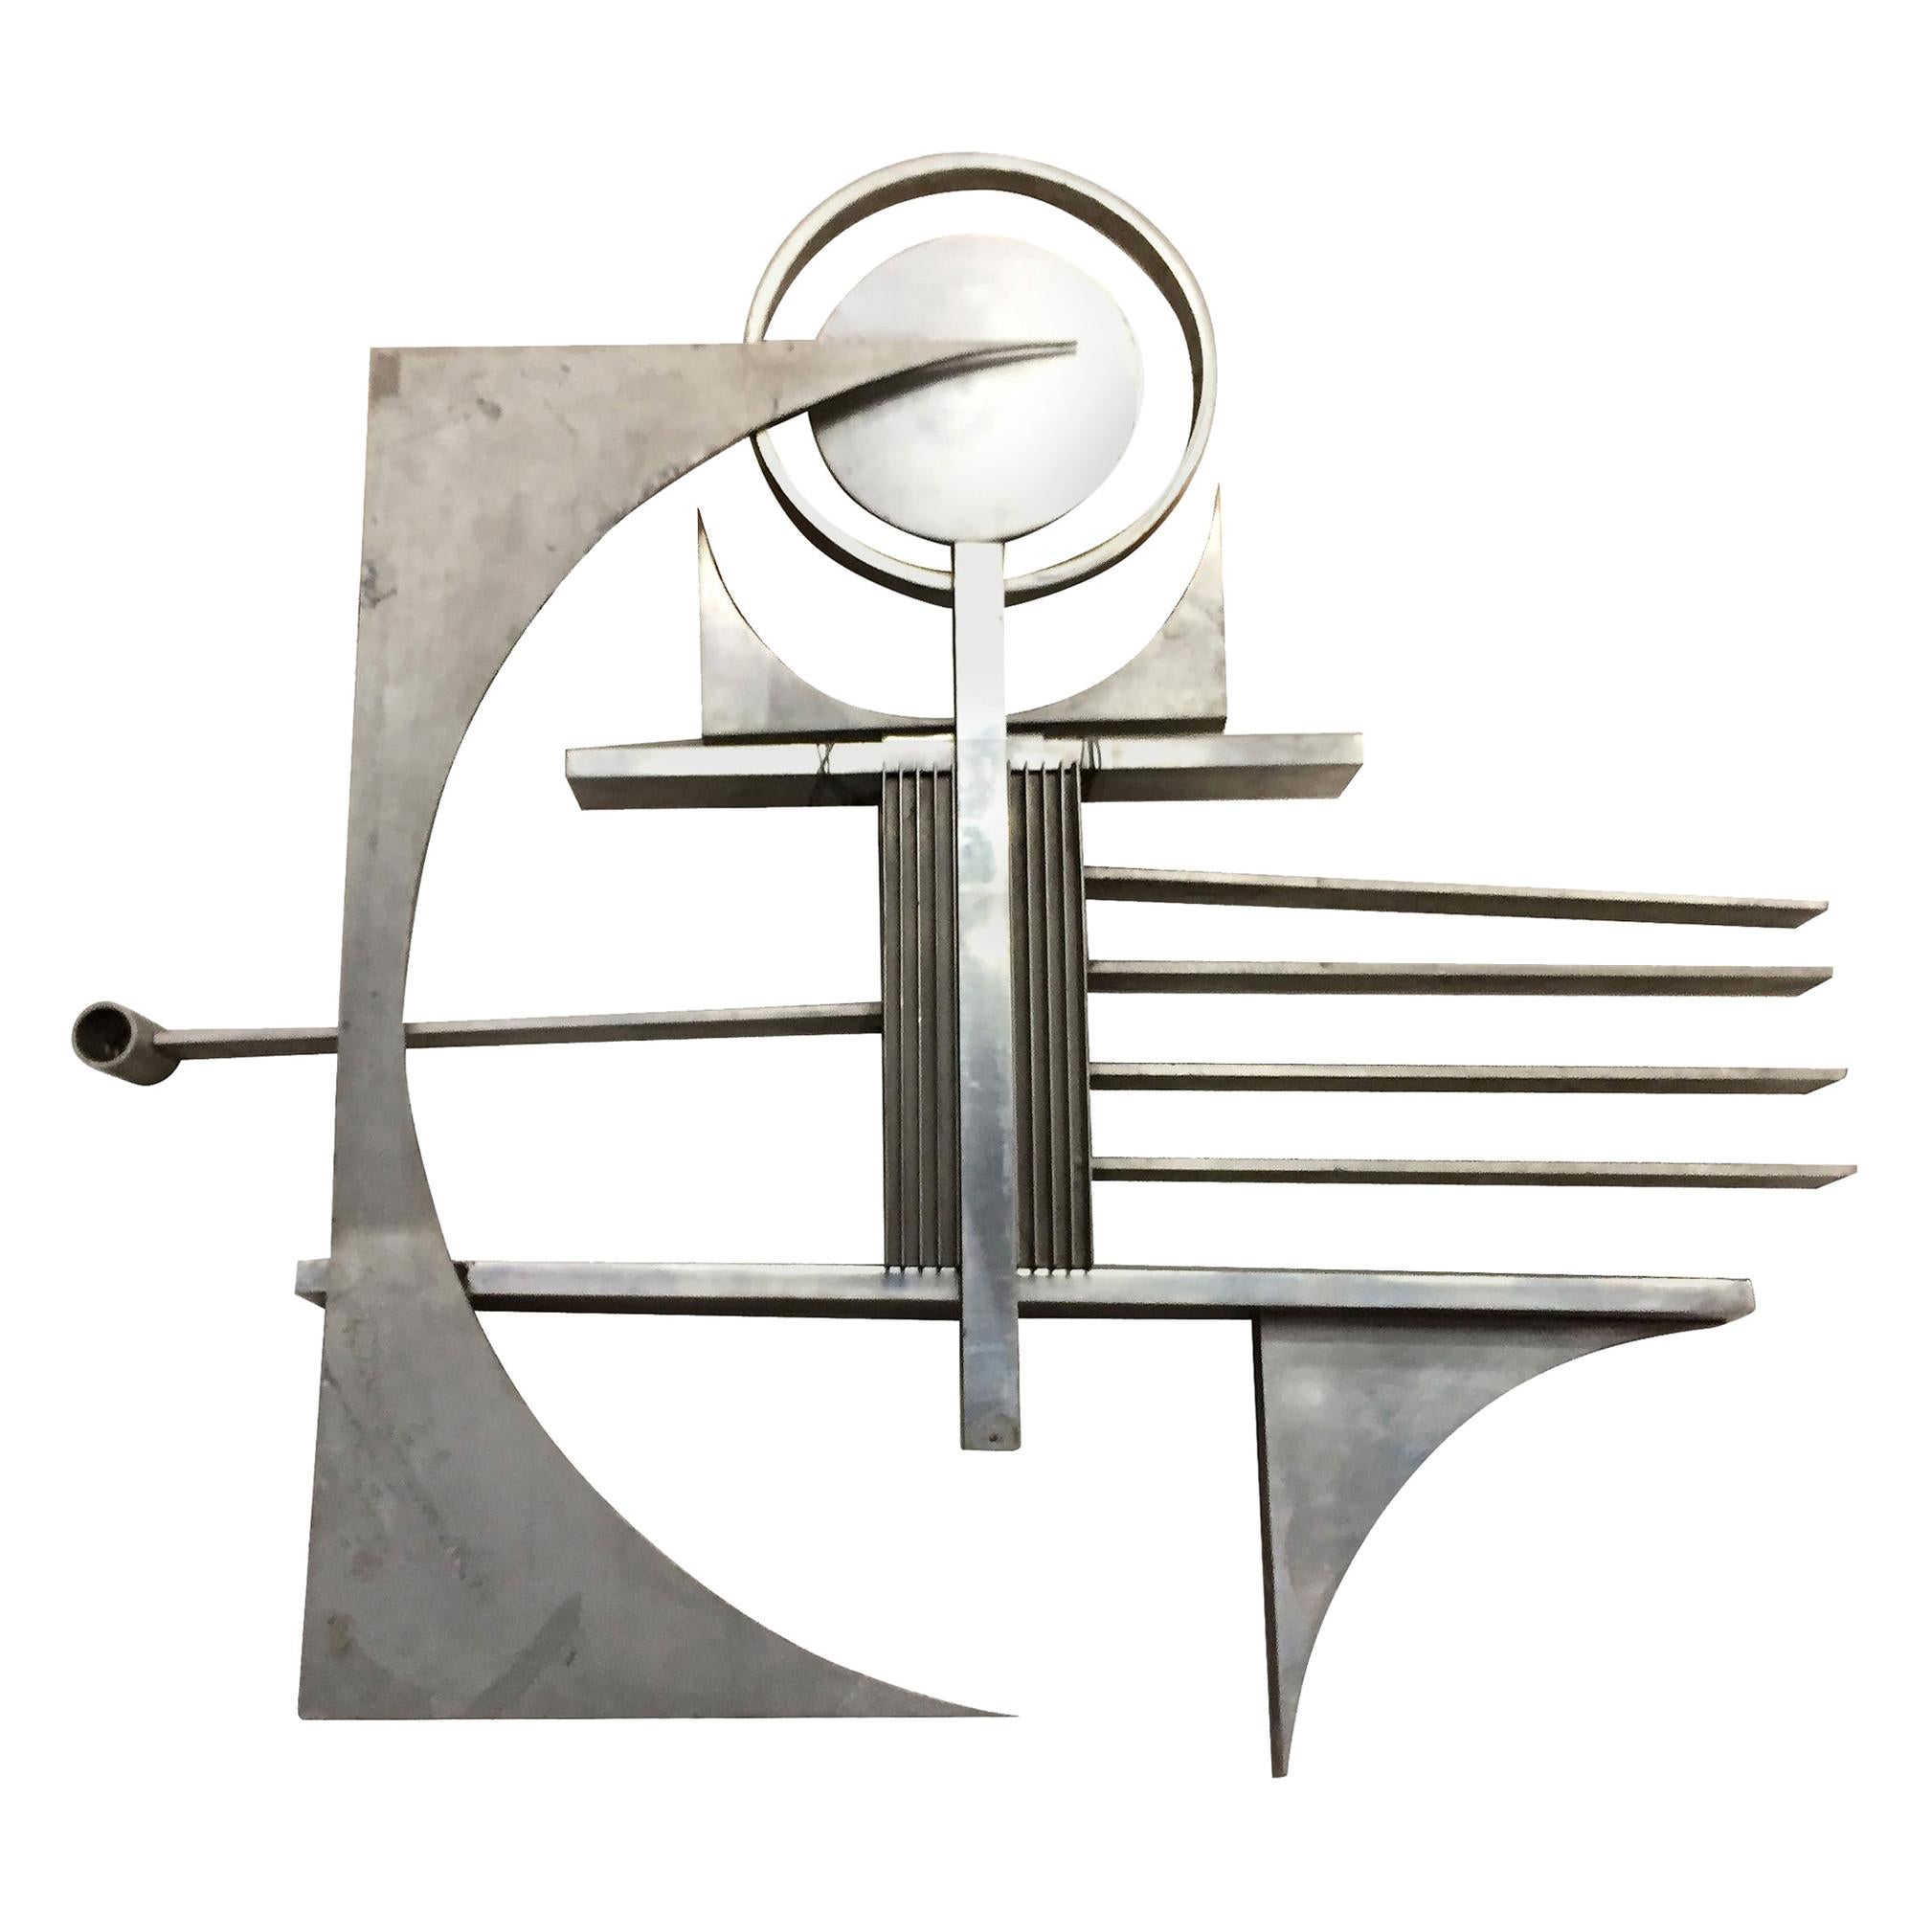 Free-Form Metal Art Wall Sculpture For Sale